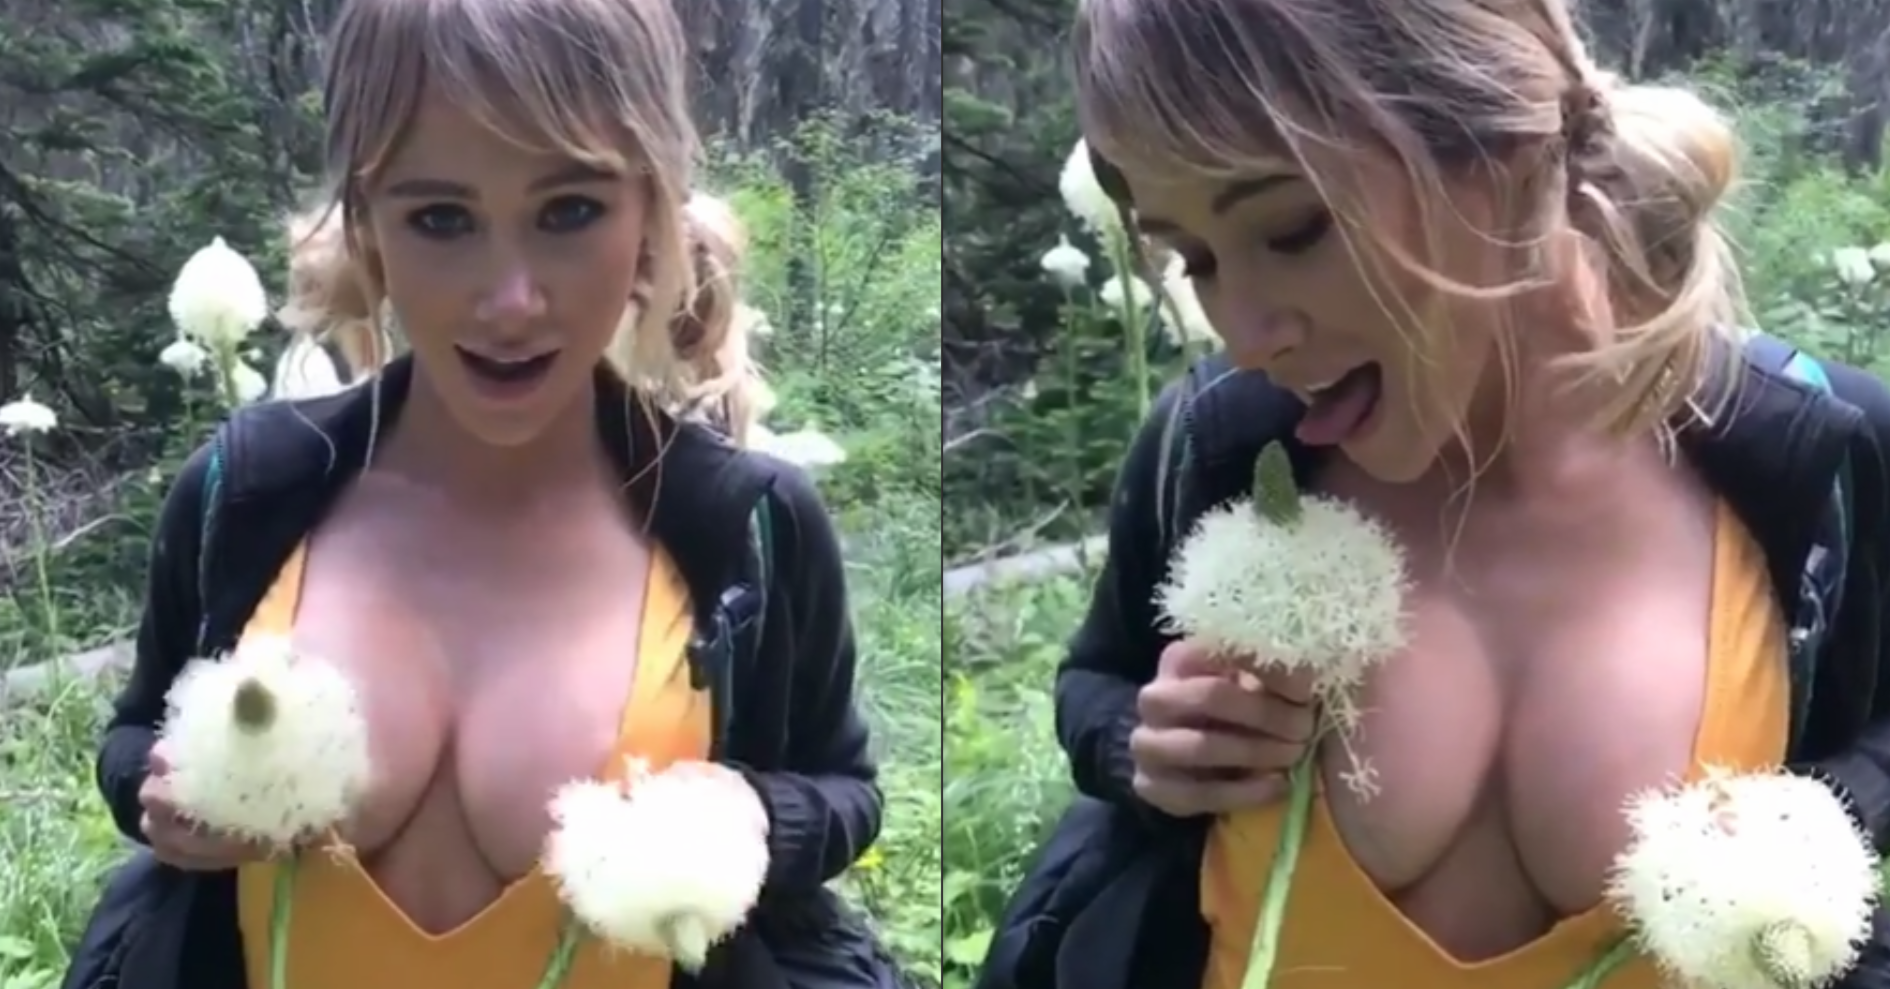 denise schooley recommends sara underwood breasts pic